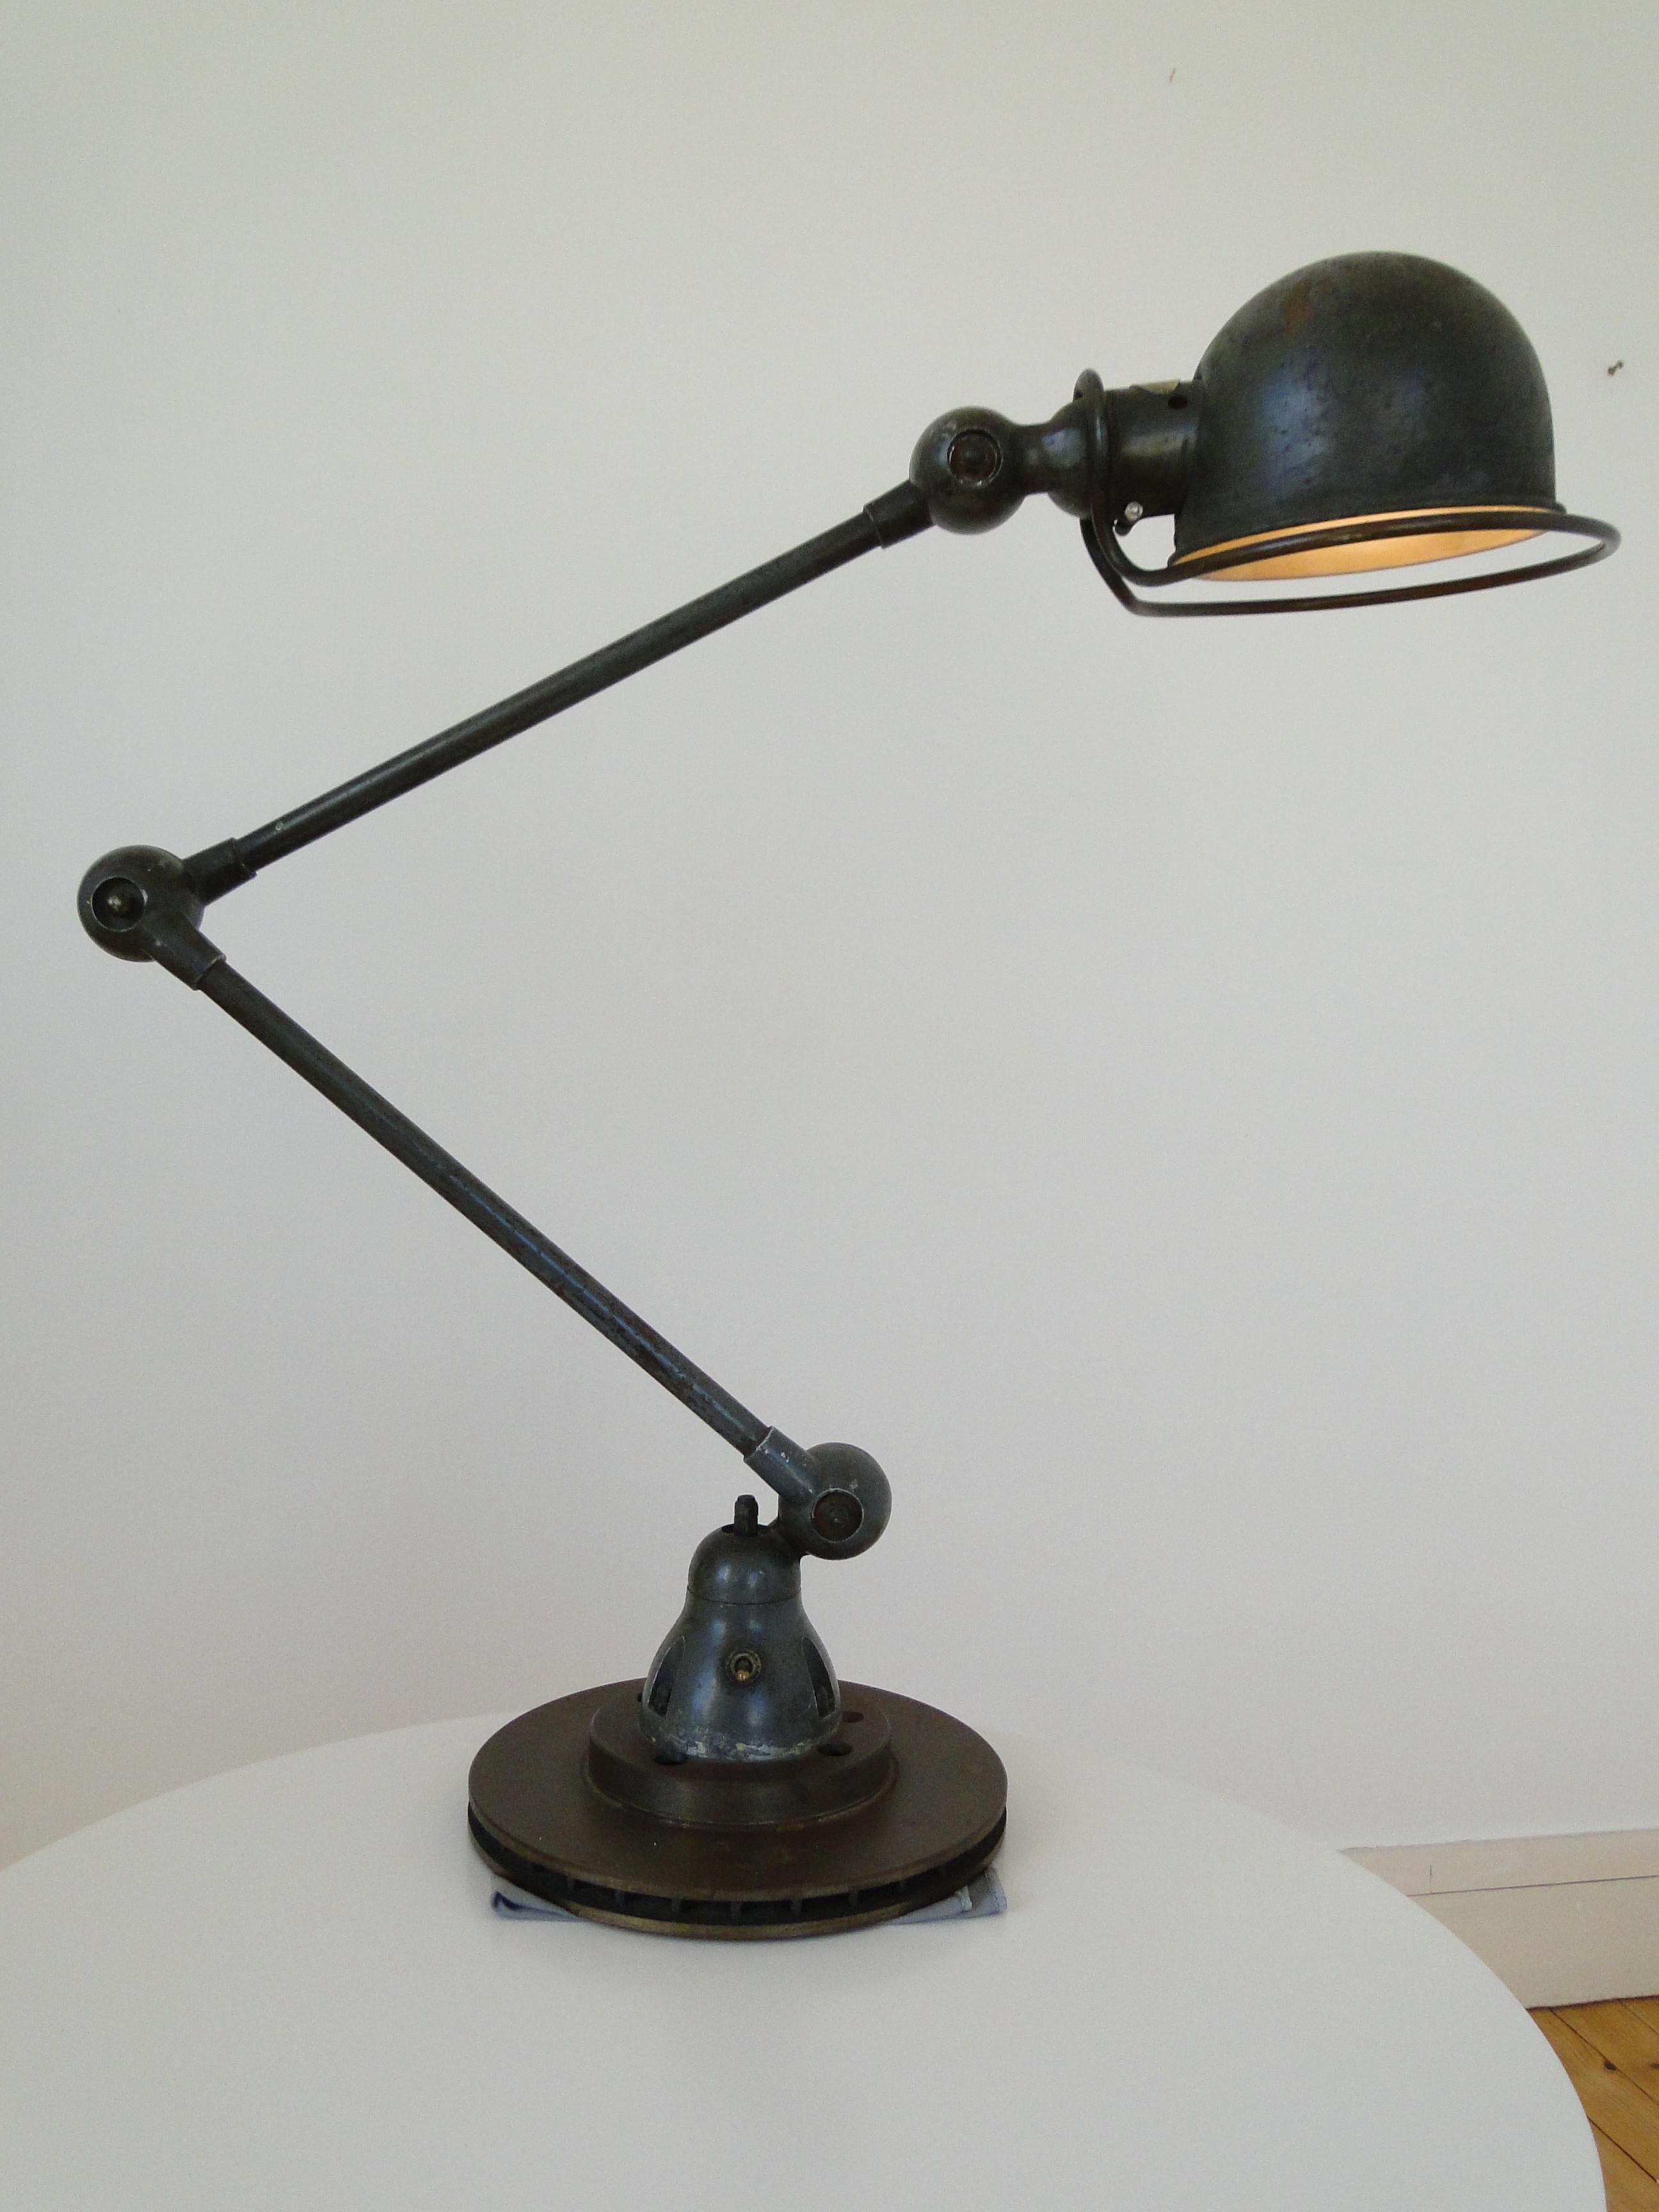 2 armed JIELDE lamp reading lamp French industrial lamp

Designed by Jean-Louis Domecq in the early 1950s

ORIGINAL Jielde lamp

The lamp stands on a new ventilated brake disc, which guarantees the best stability

The electrification has been